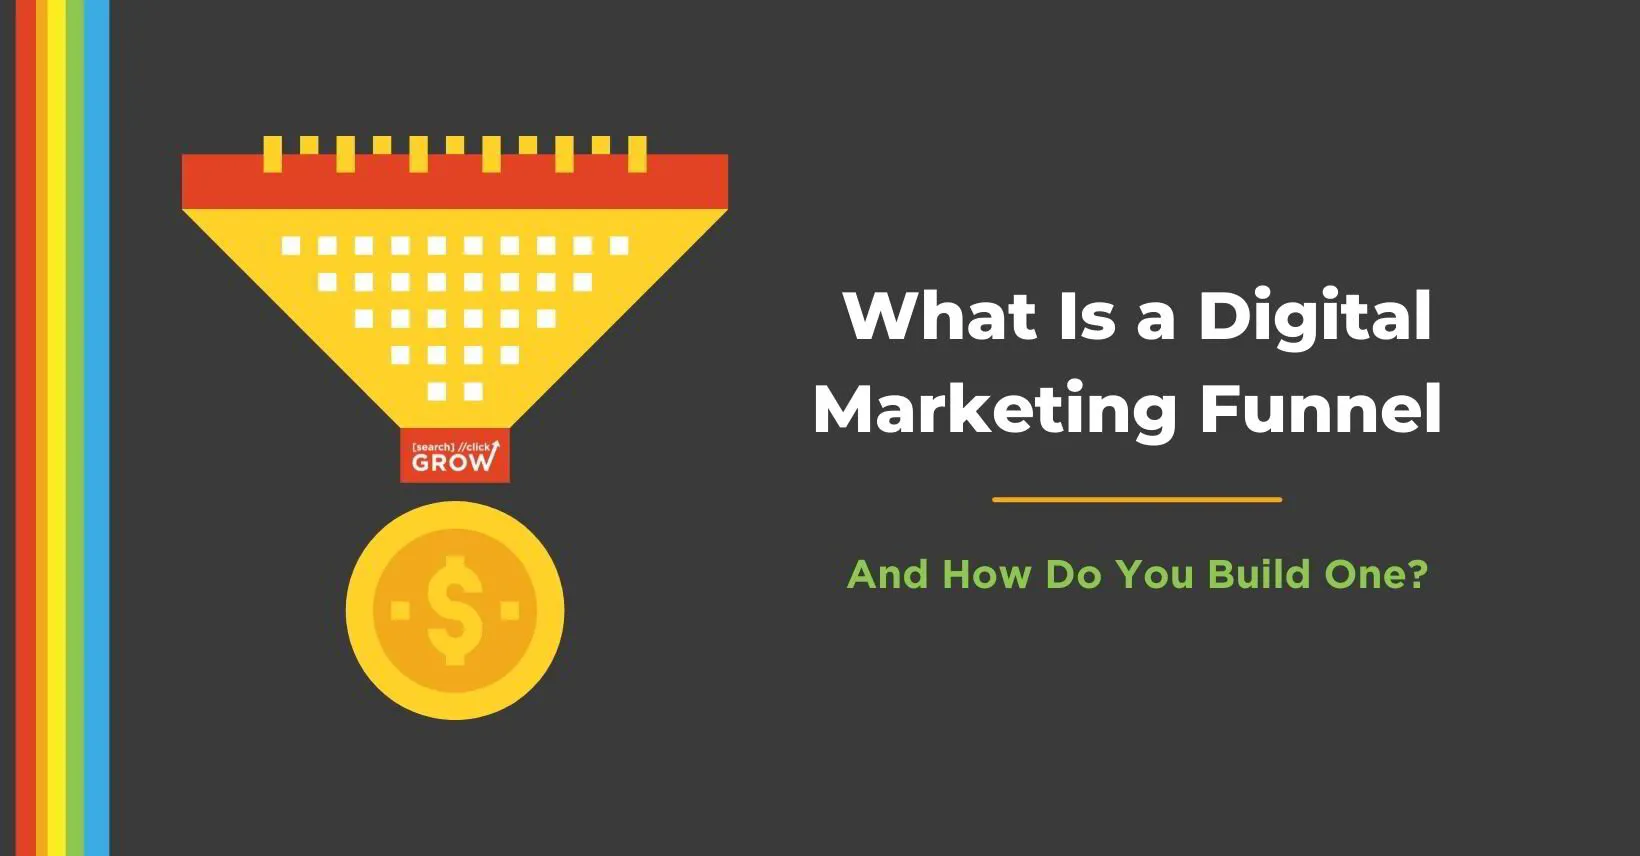 What Is a Digital Marketing Funnel and How Do You Build One?